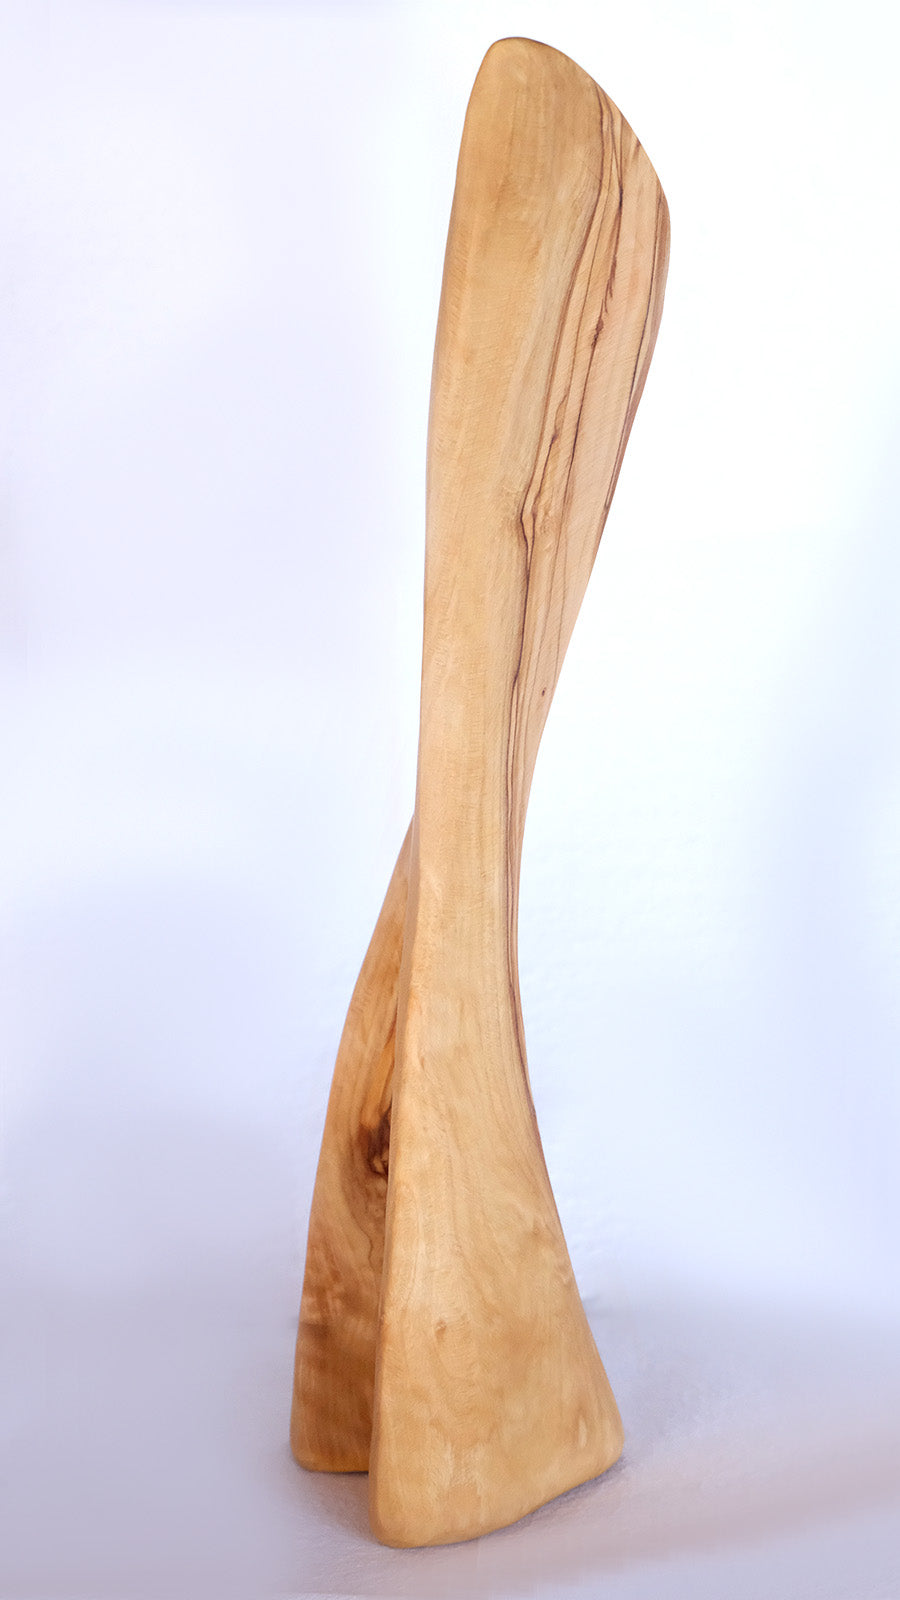 Abstract Handcrafted Sculpture from Reclaimed Olive Wood